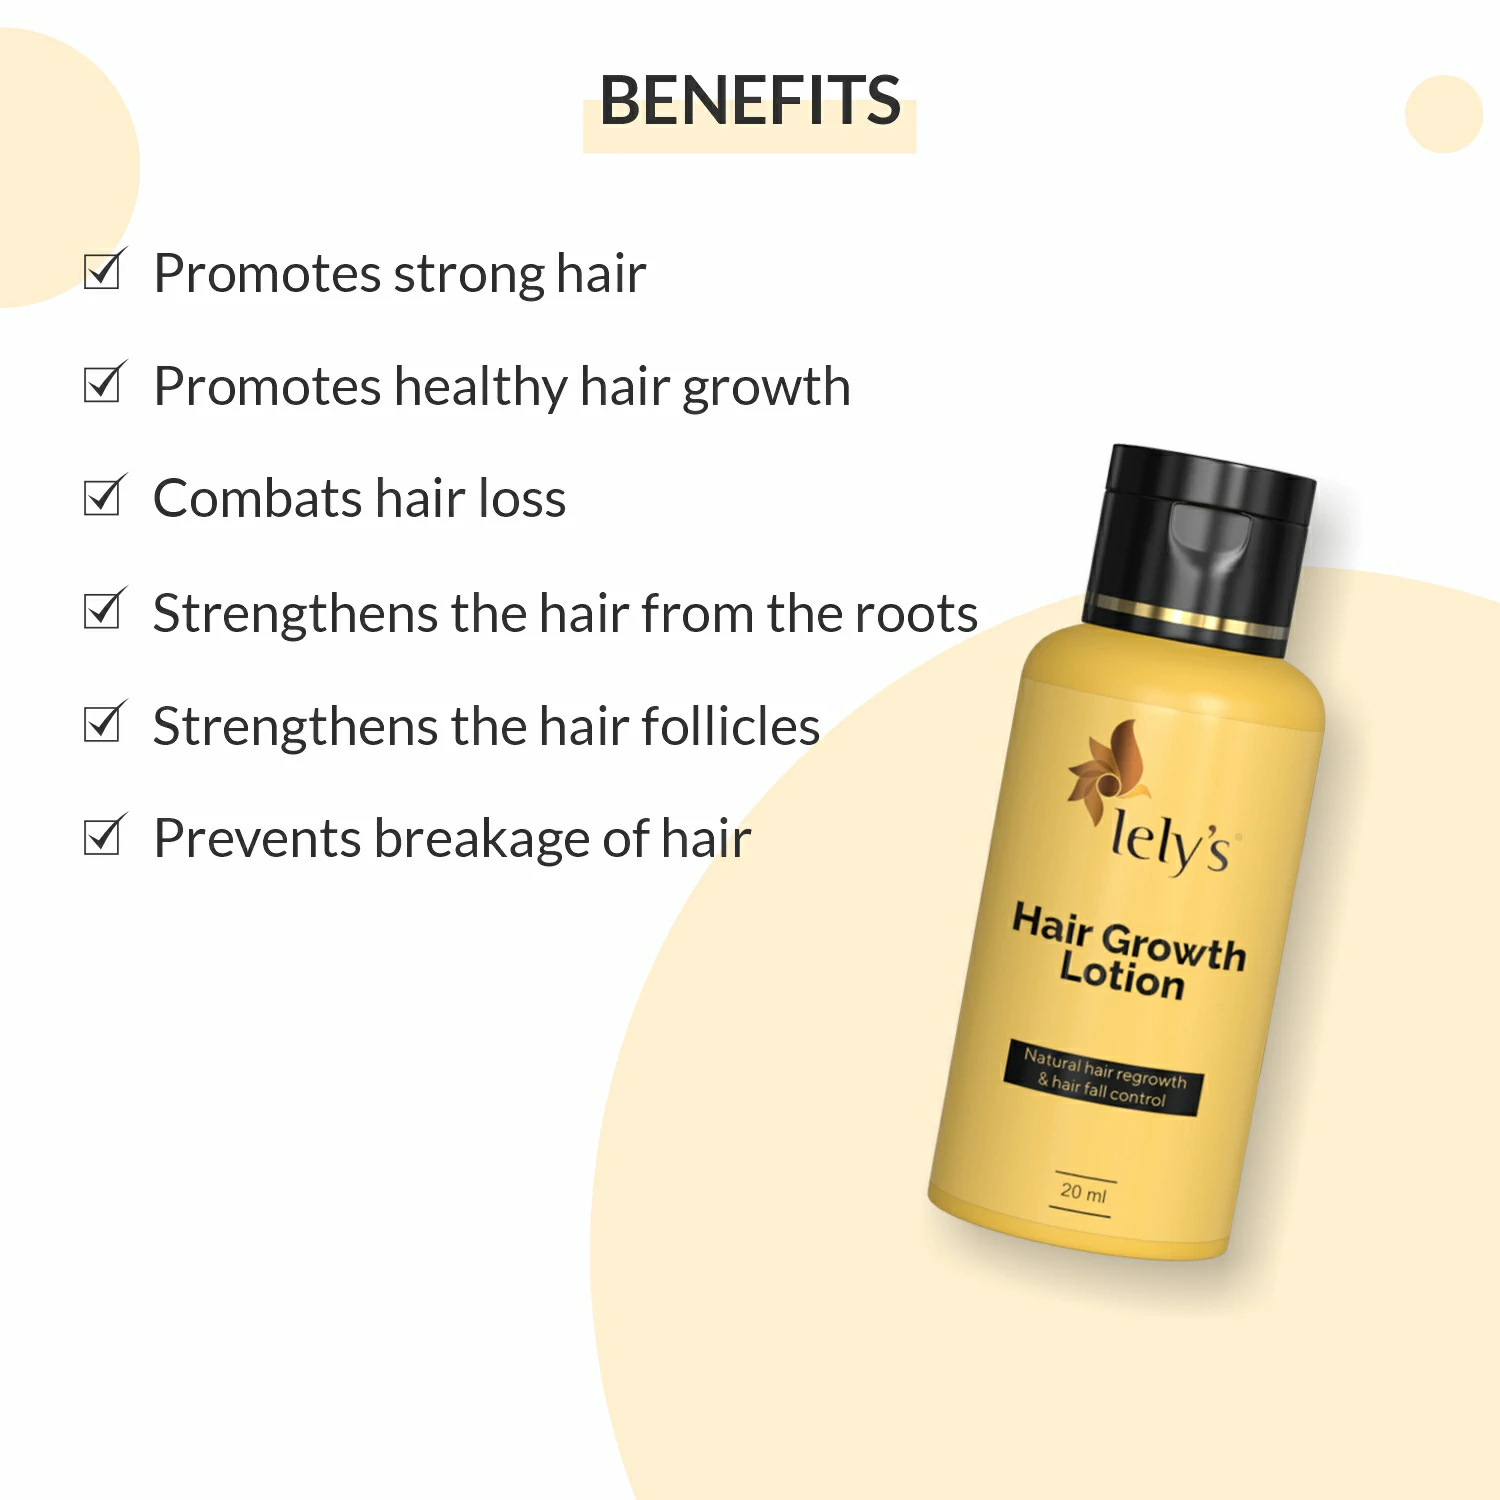 Hair Growth Lotion Travel Size Benefits